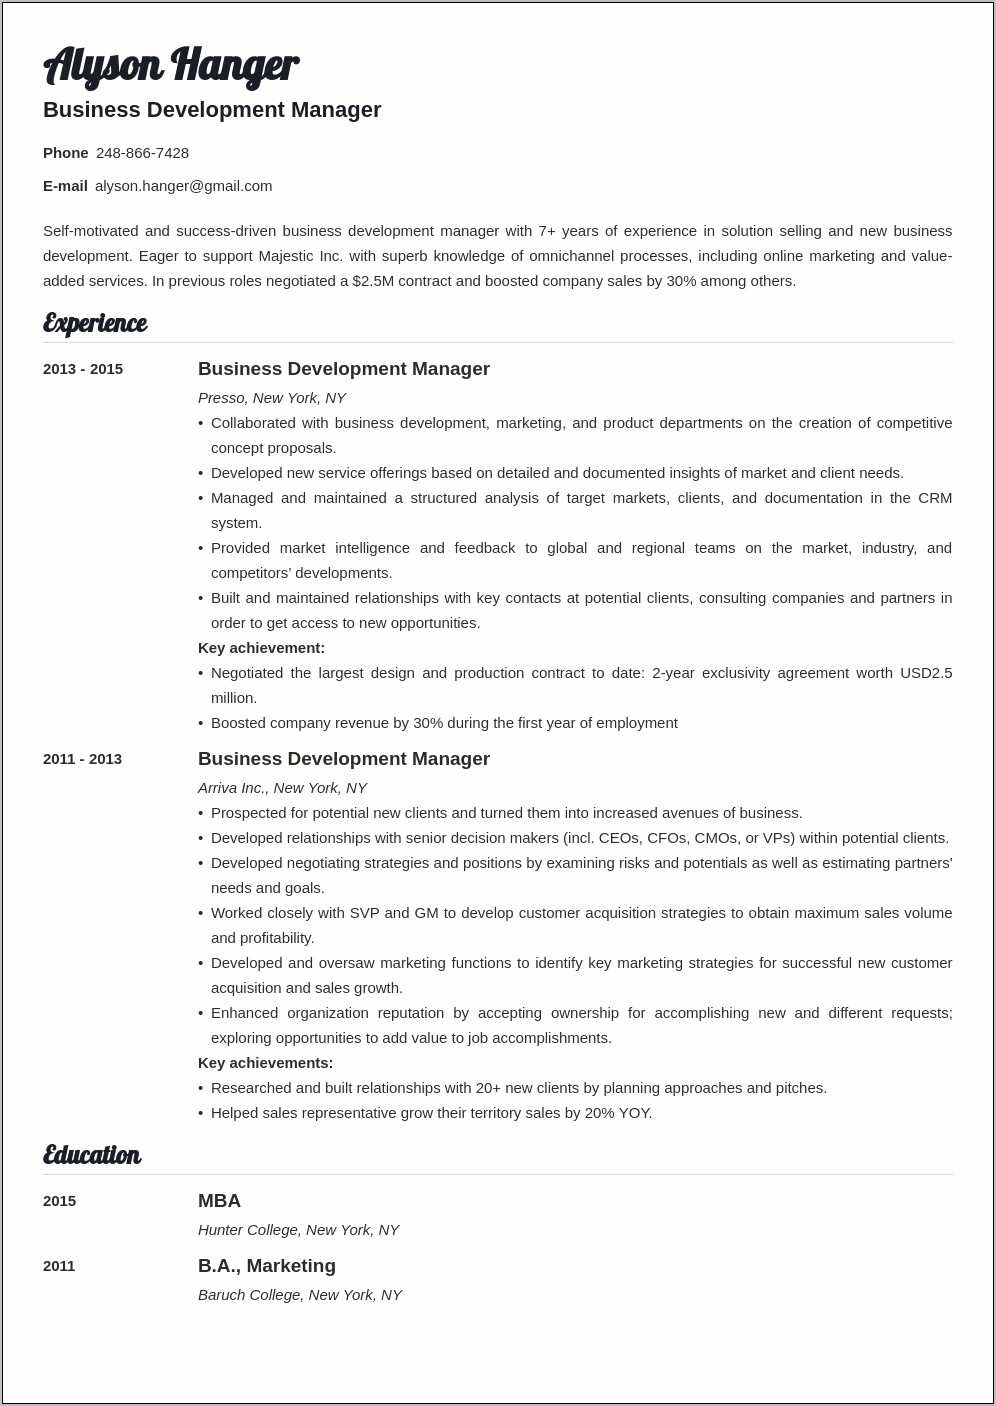 Business Development Manager Objective Resume